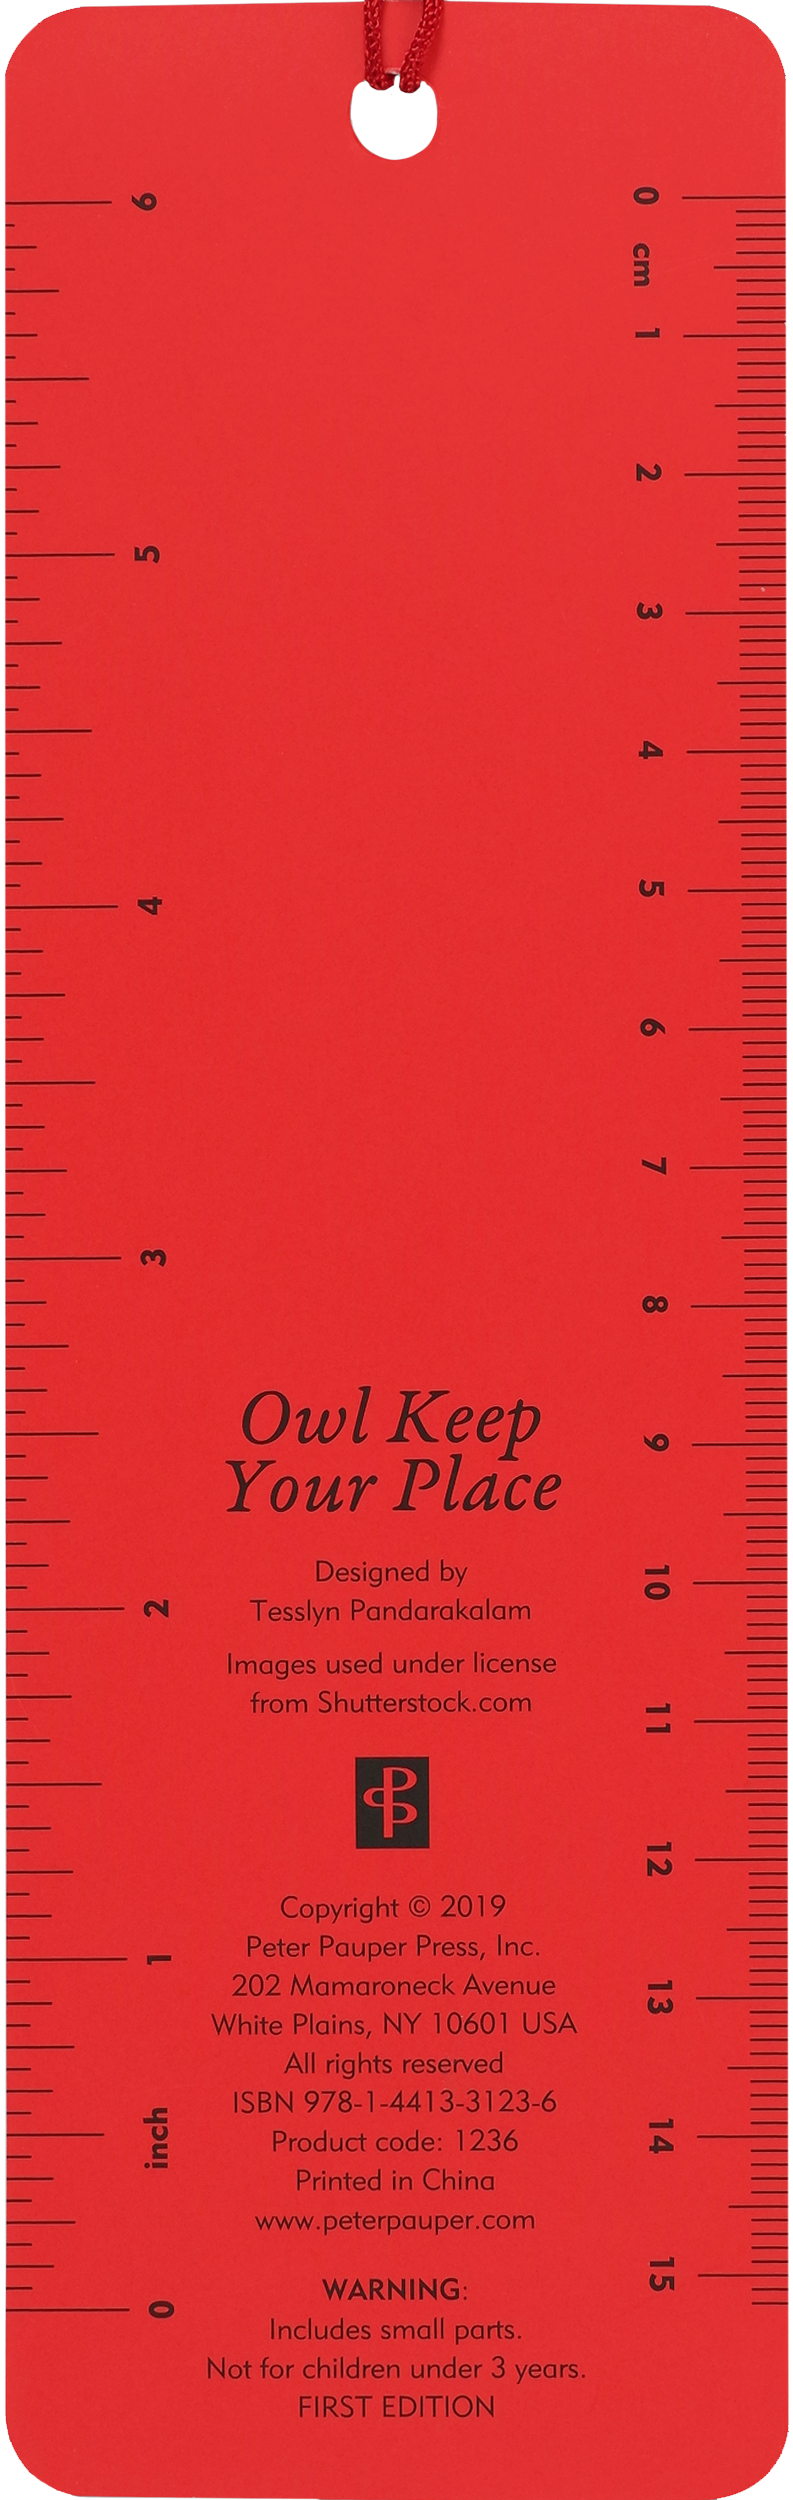 Peter Pauper Press - Owl Keep Your Place Youth Bookmark